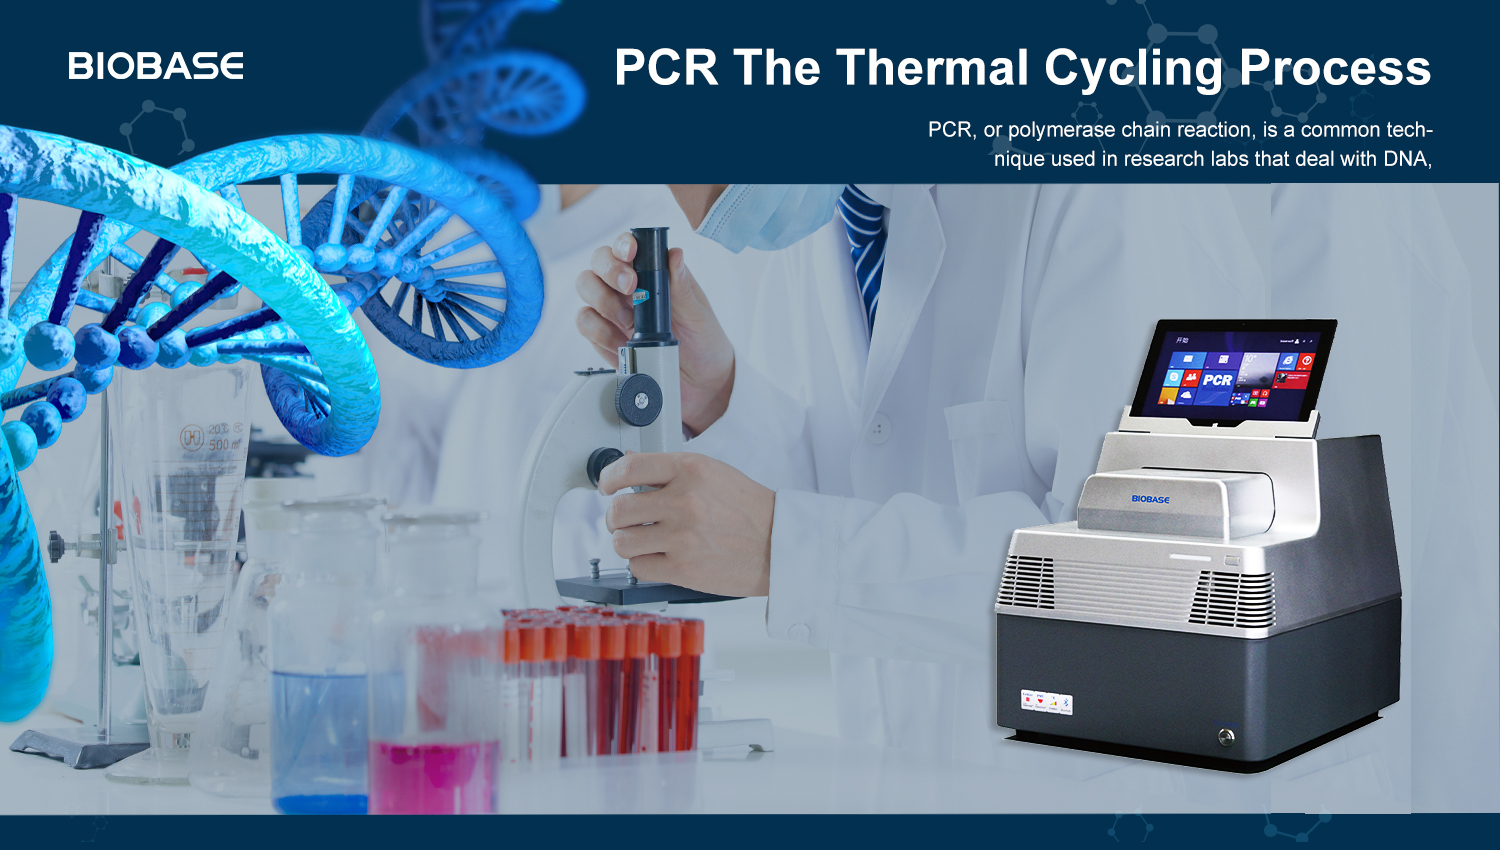 The Thermal Cycling Process